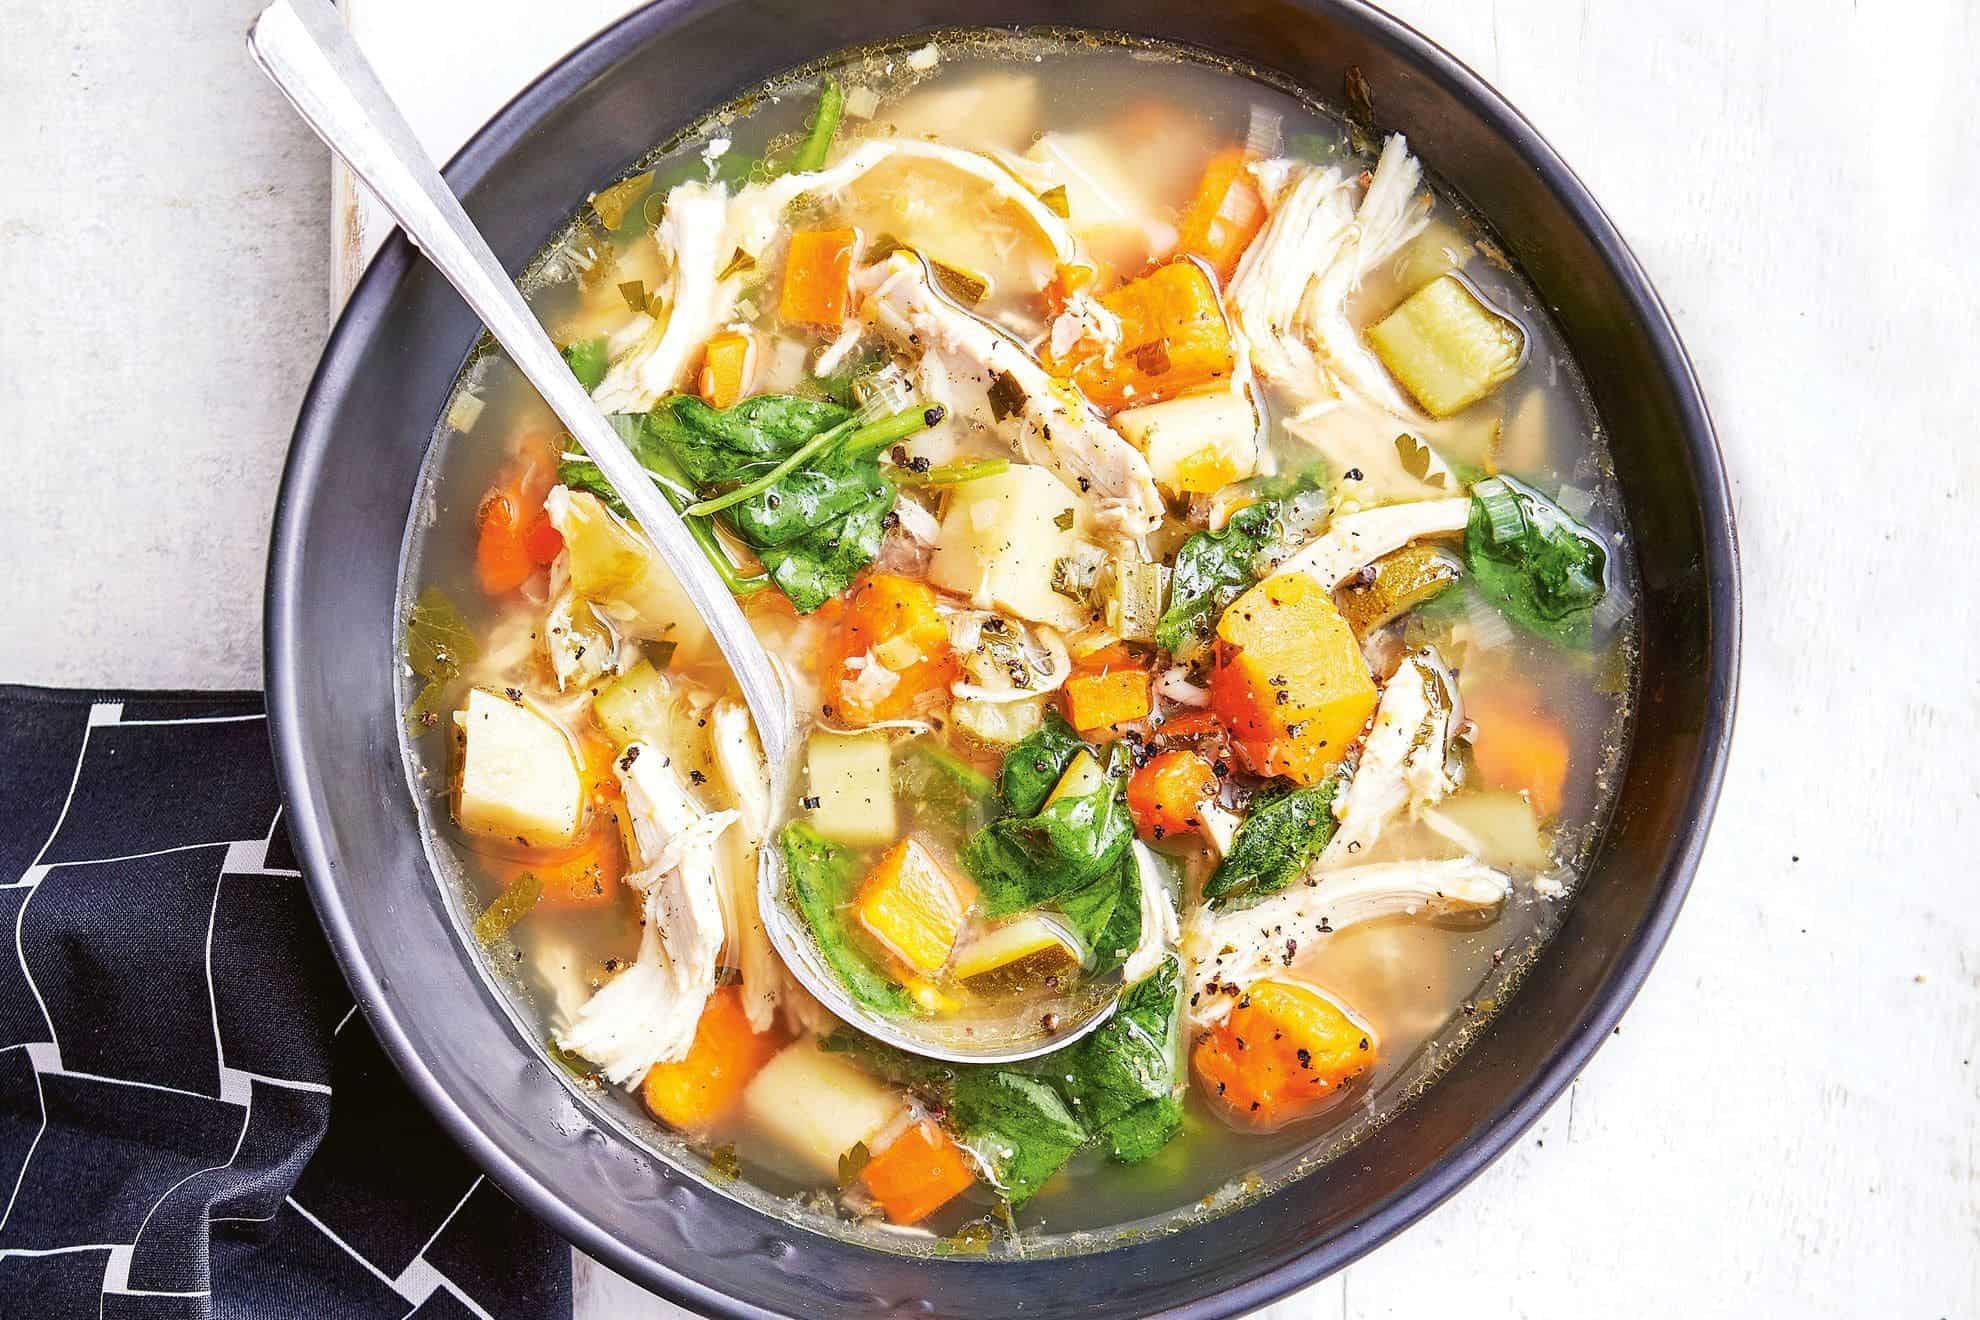 Slow cooker chicken soup